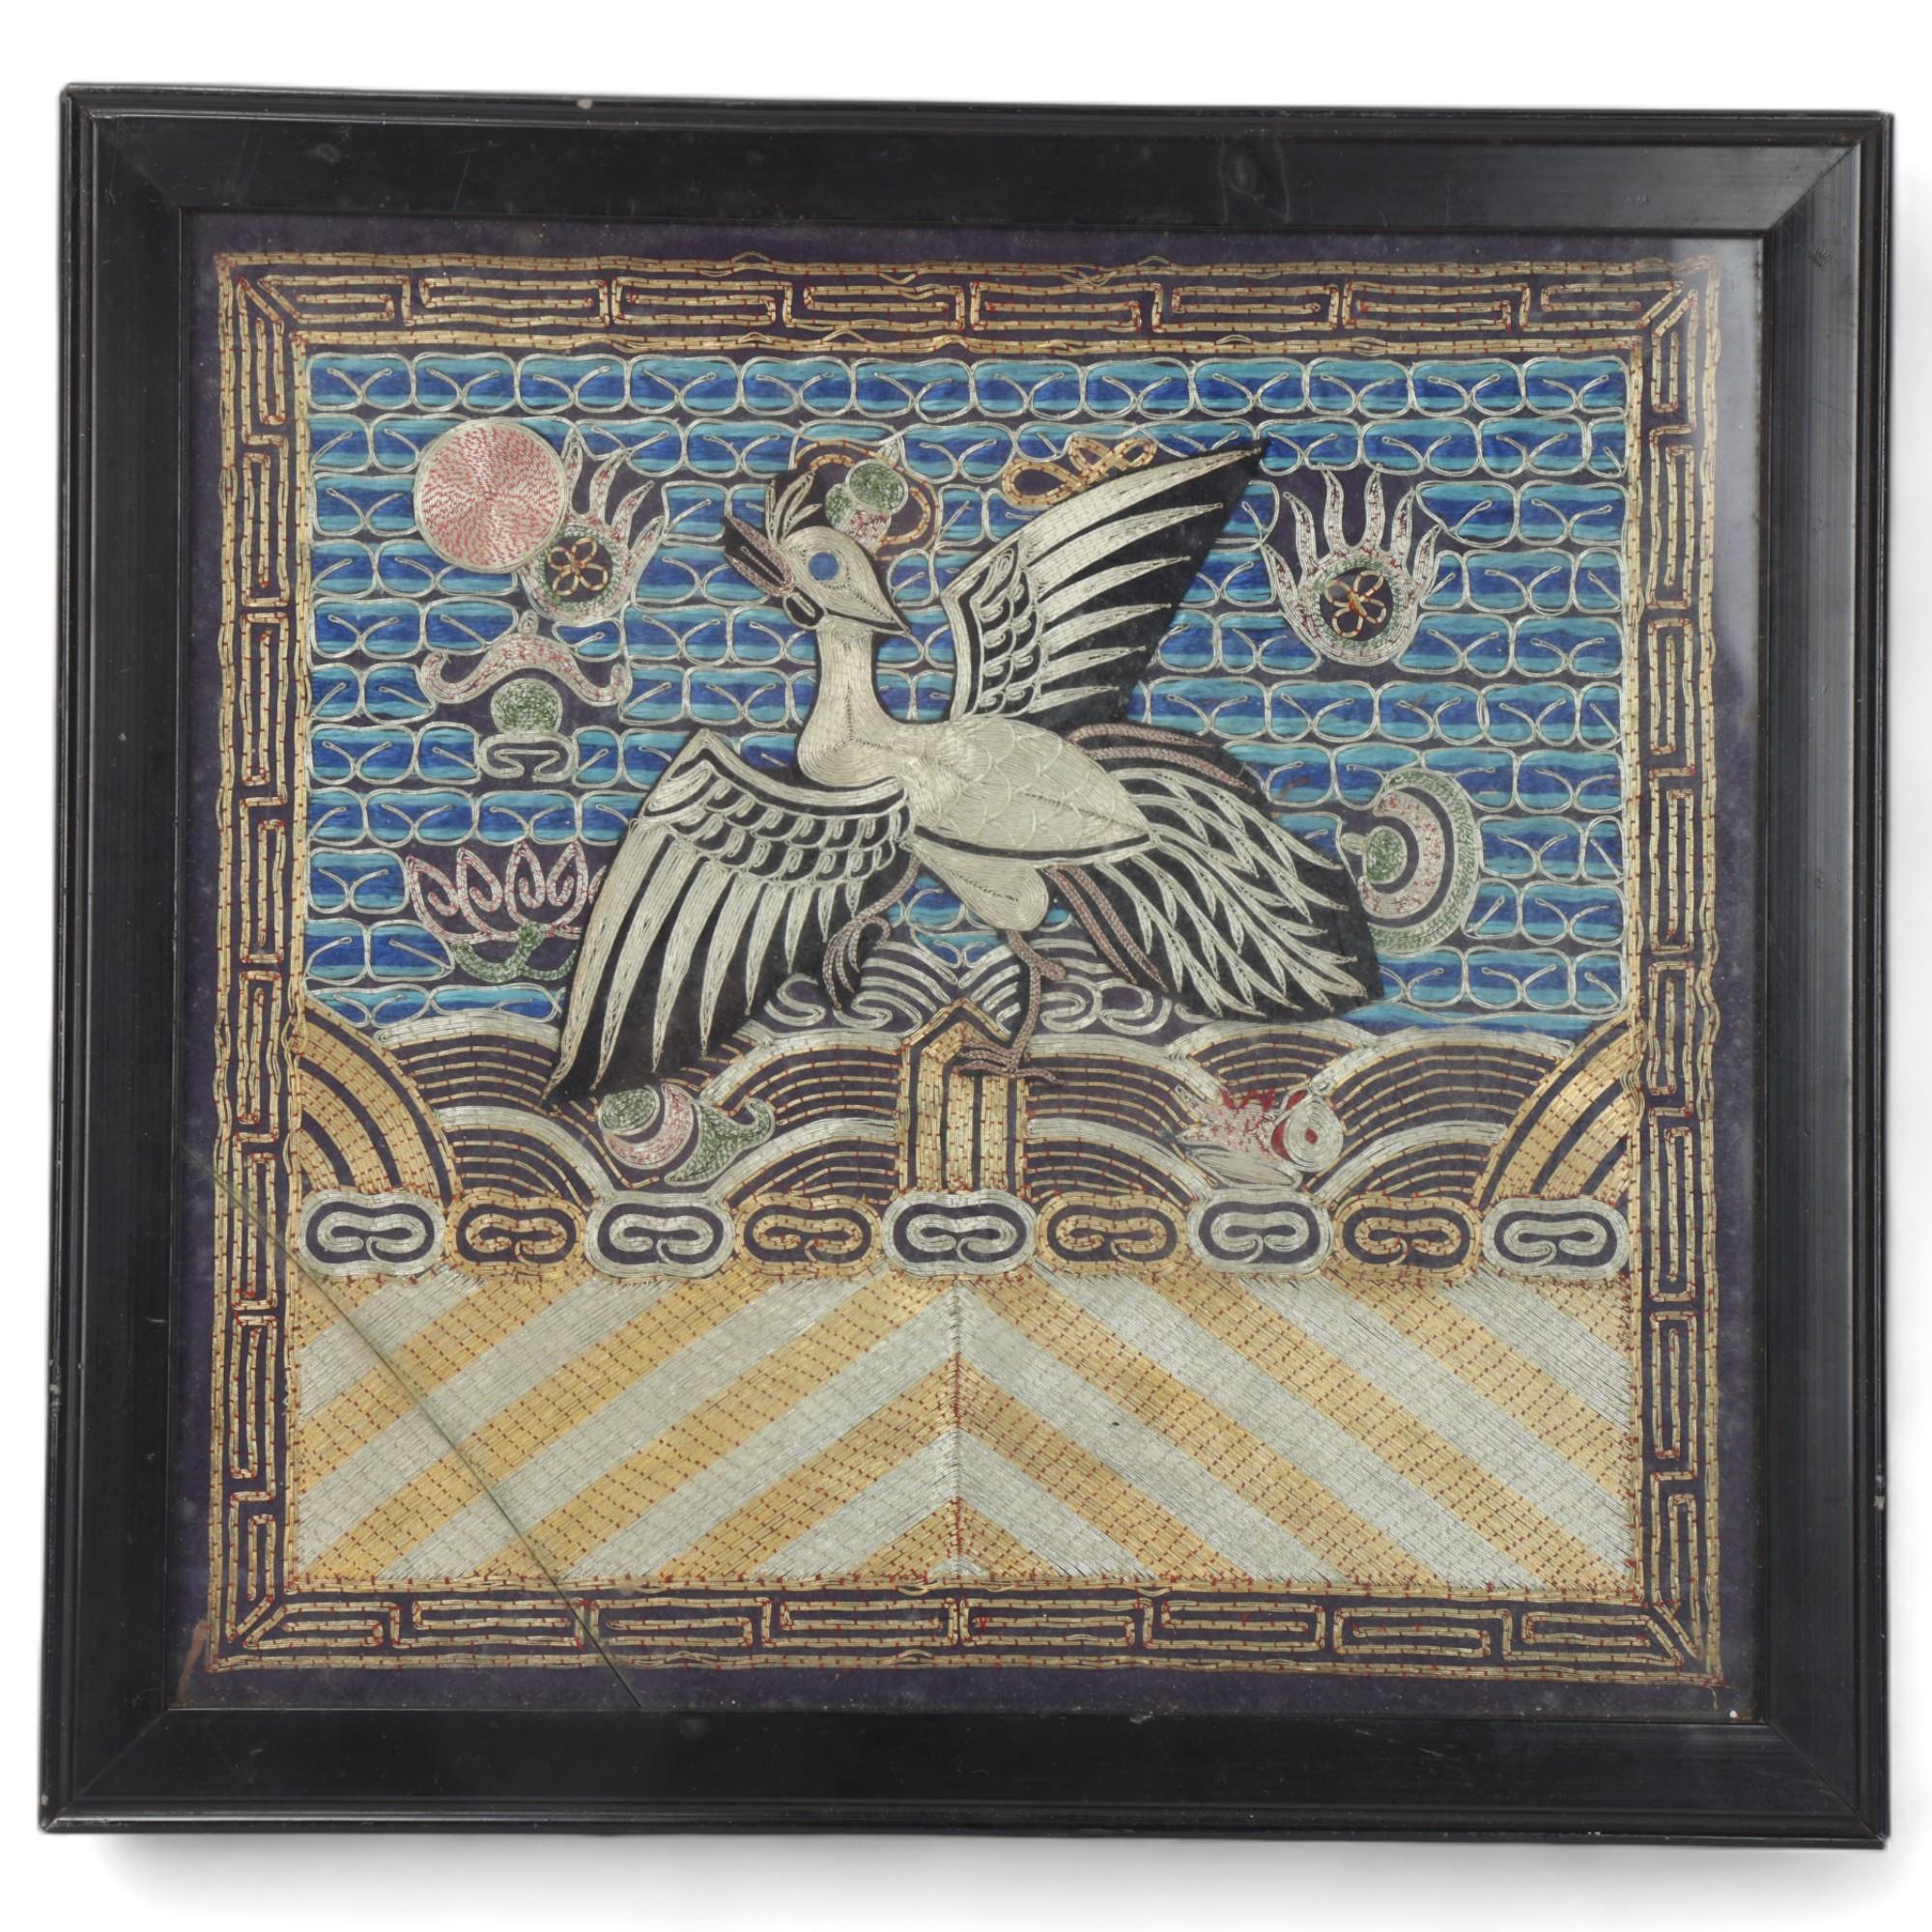 A Chinese gold and silver embroidered panel depicting a phoenix, modern frame, overall frame